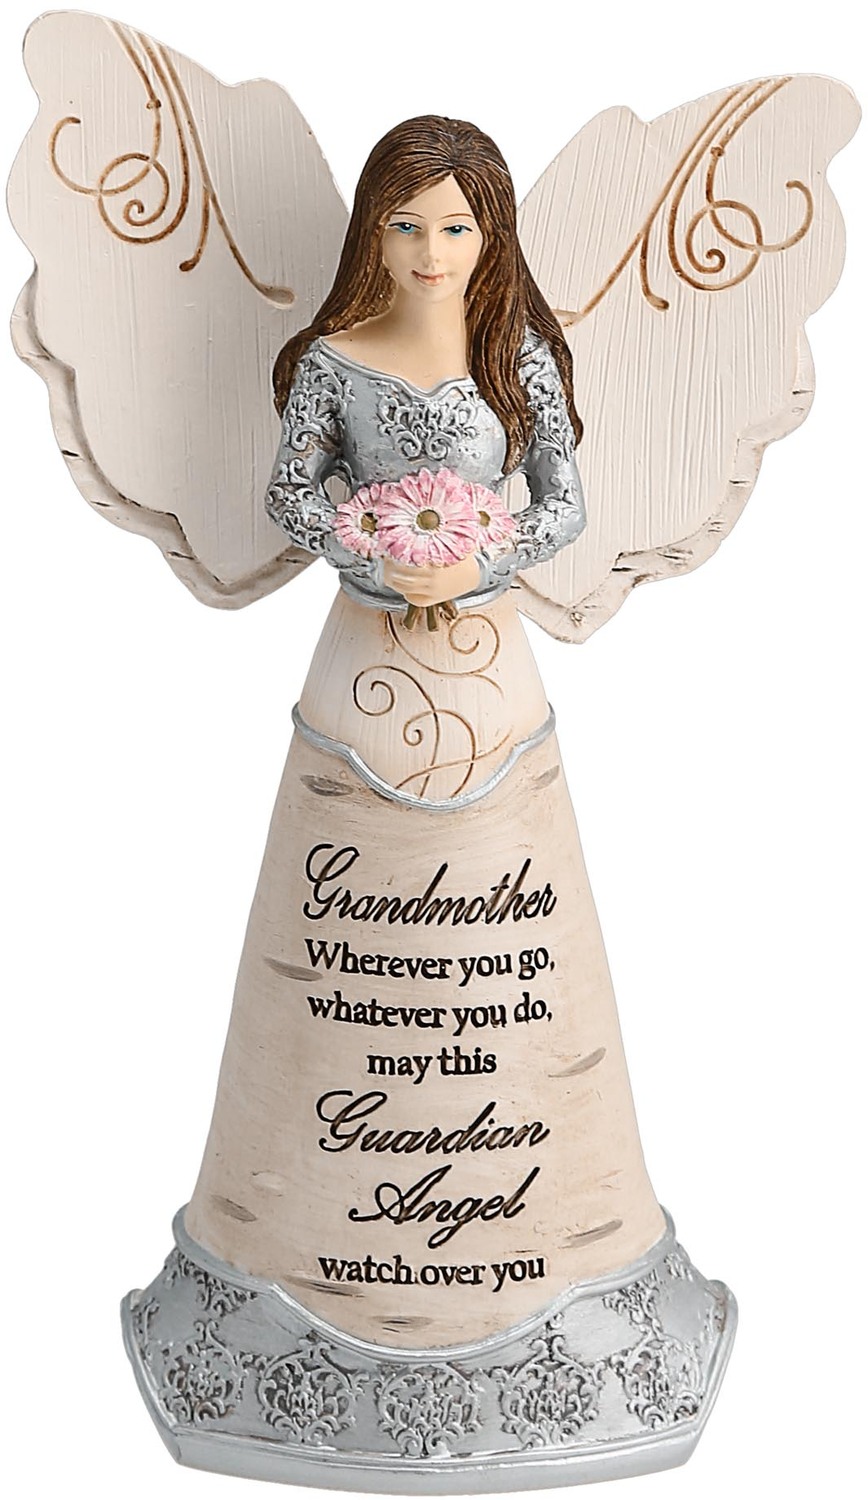 Grandmother Guardian Angel by Elements - Grandmother Guardian Angel - 6" Guardian Angel